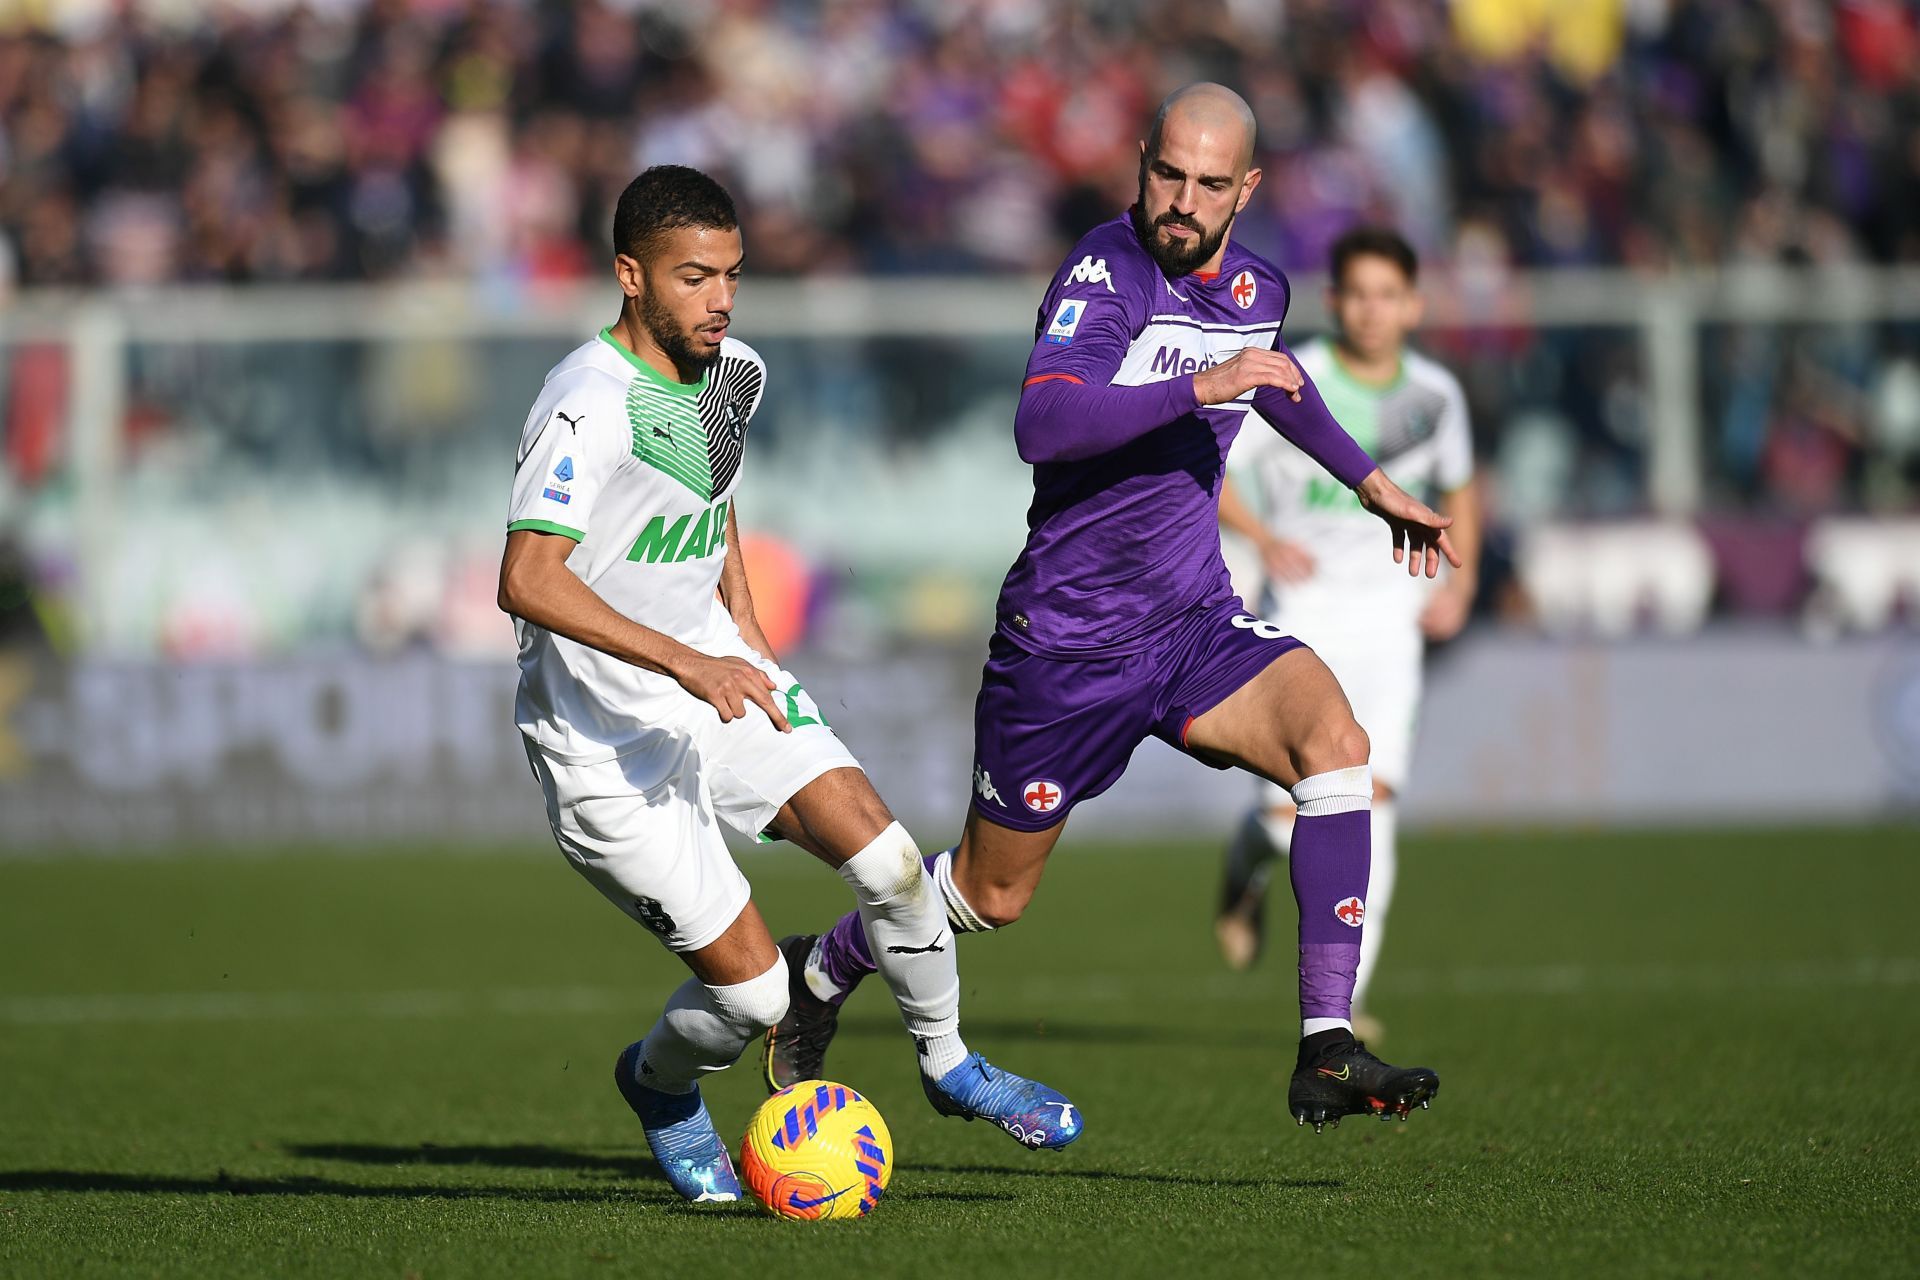 Sassuolo and Fiorentina clash in their Serie A fixture on Saturday